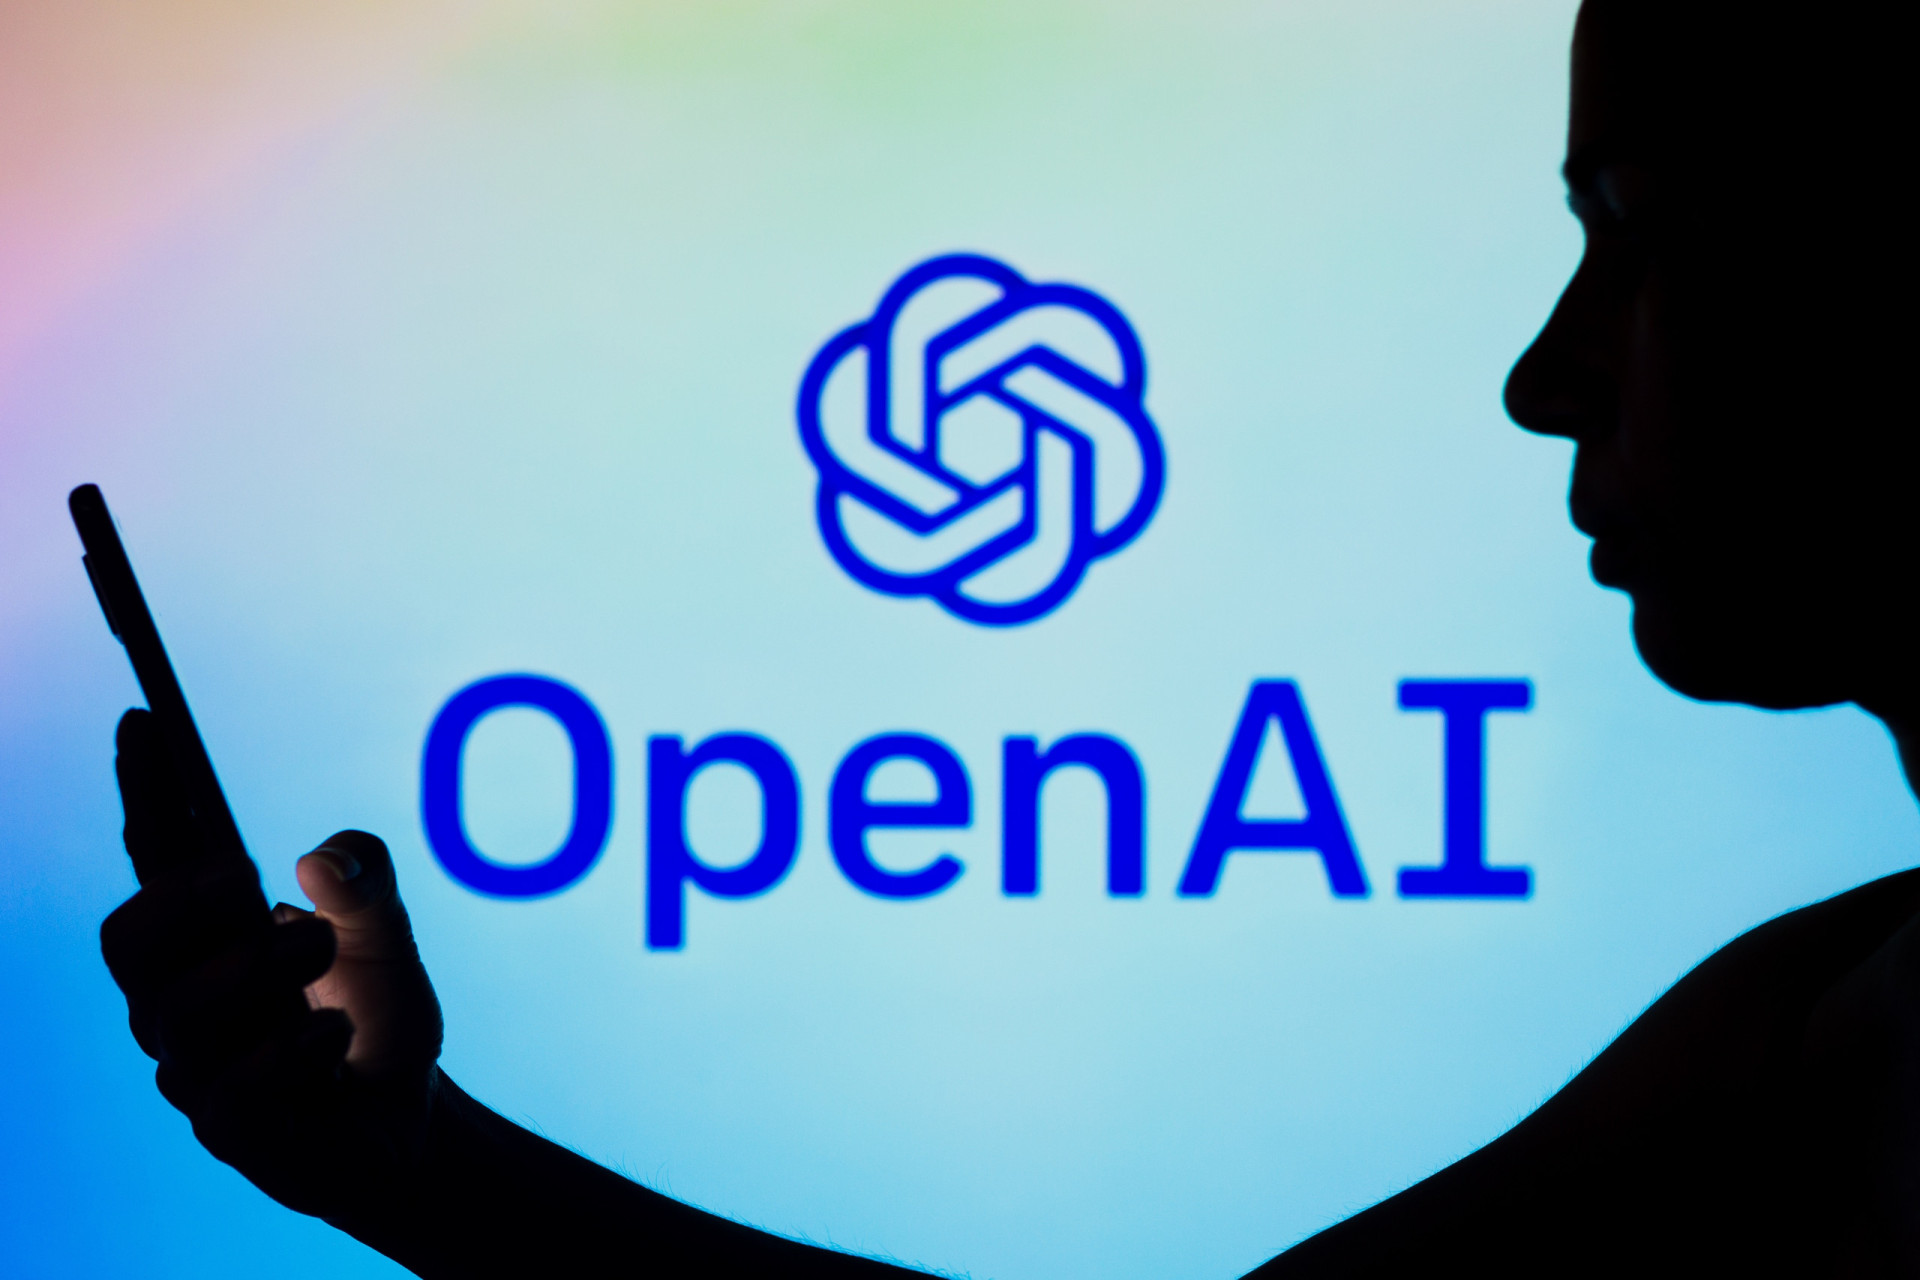 <p>To bypass issues of other bots, OpenAI has reportedly employed an AI-based moderation system, Moderation API, which has been trained to help developers determine whether language goes against OpenAI’s content policy, which then blocks unsafe or illegal information from passing through. It’s a flawed system, however.</p><p>You may also like:<a href="https://www.starsinsider.com/n/390097?utm_source=msn.com&utm_medium=display&utm_campaign=referral_description&utm_content=535019en-us"> Celebrity personal chefs dish their spiciest confessions</a></p>